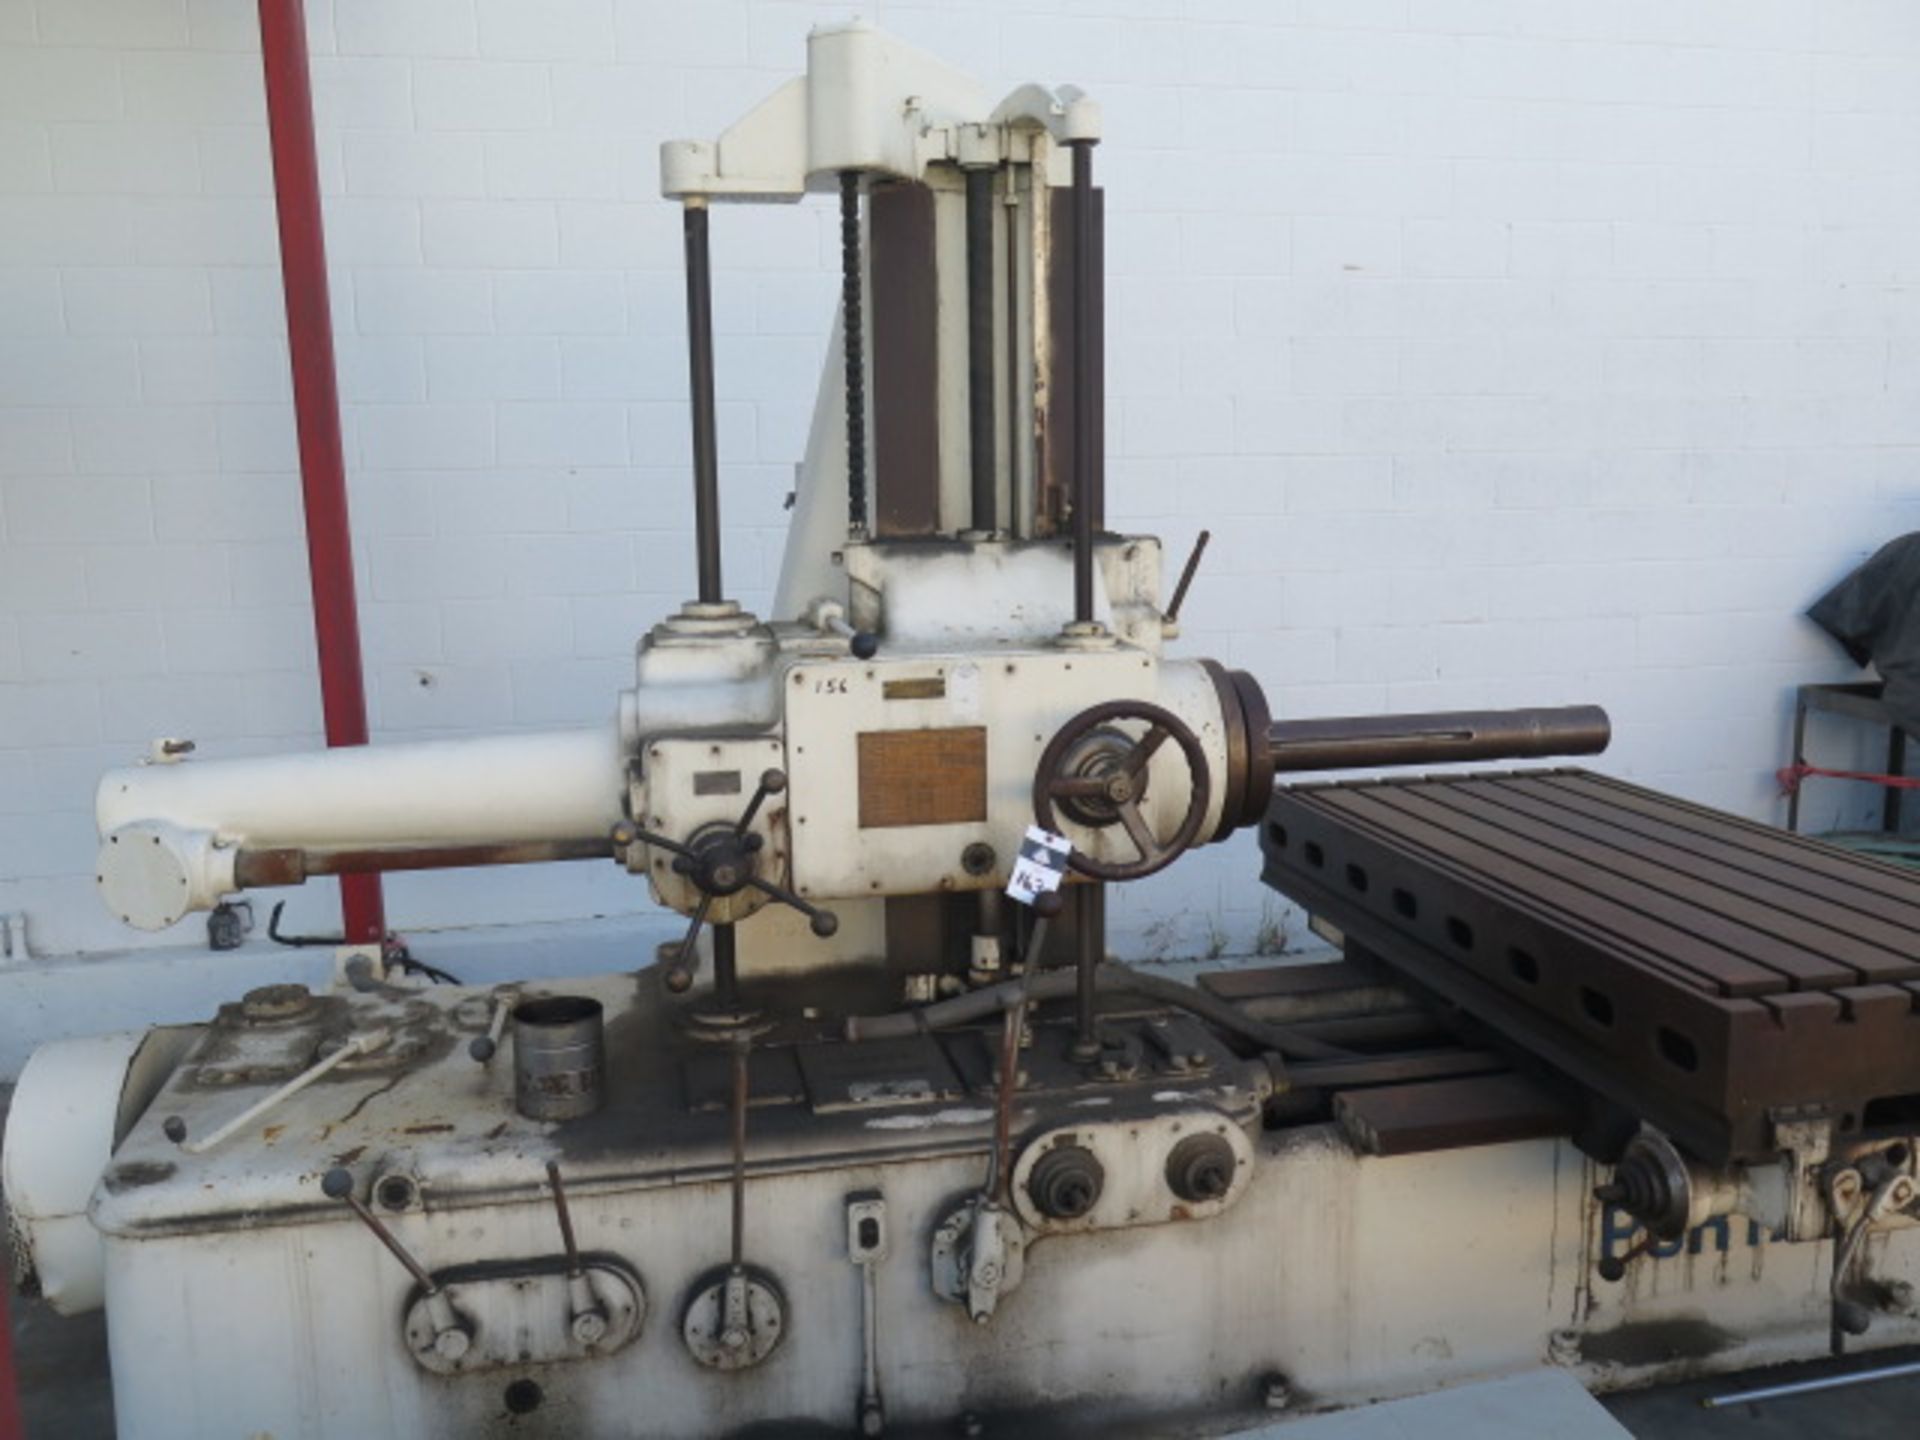 Portage Machine Co. Horizontal Boring Mill w/ 17-611 Geared RPM, Power Feeds, 4''. SOLD AS IS - Image 3 of 12